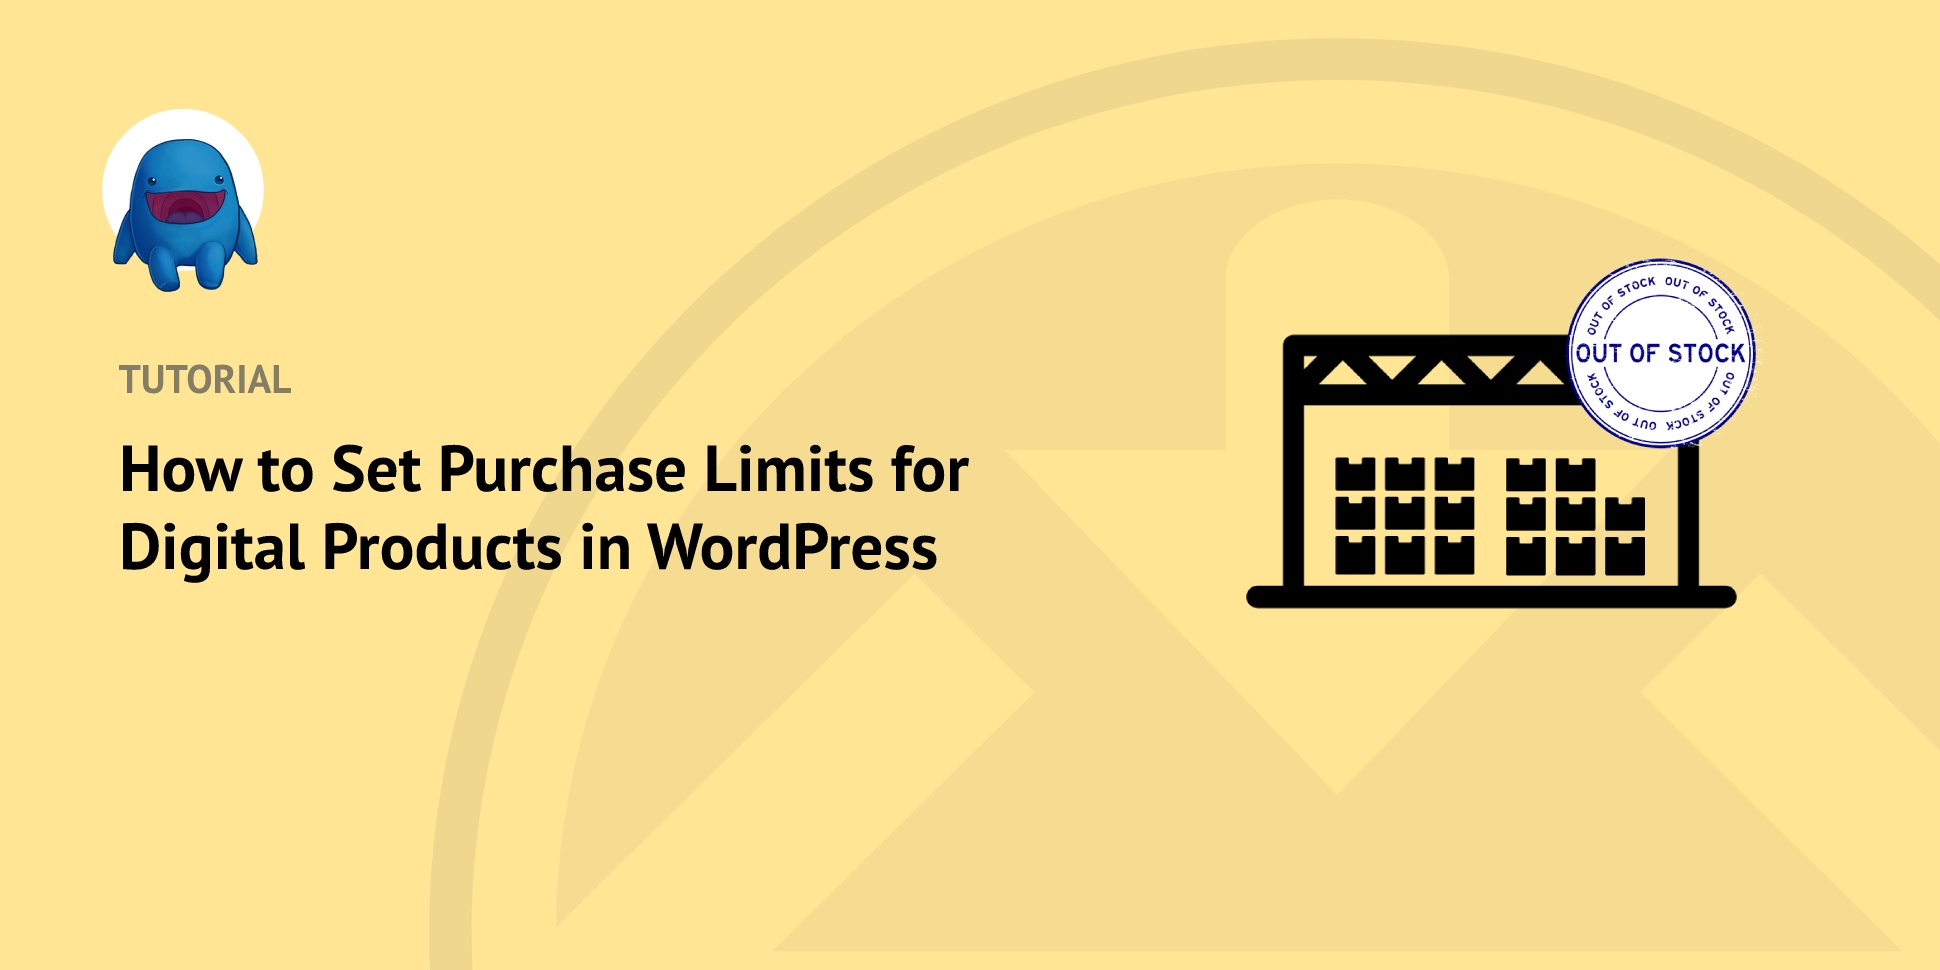 How to Set Purchase Limits for Digital Products in WordPress